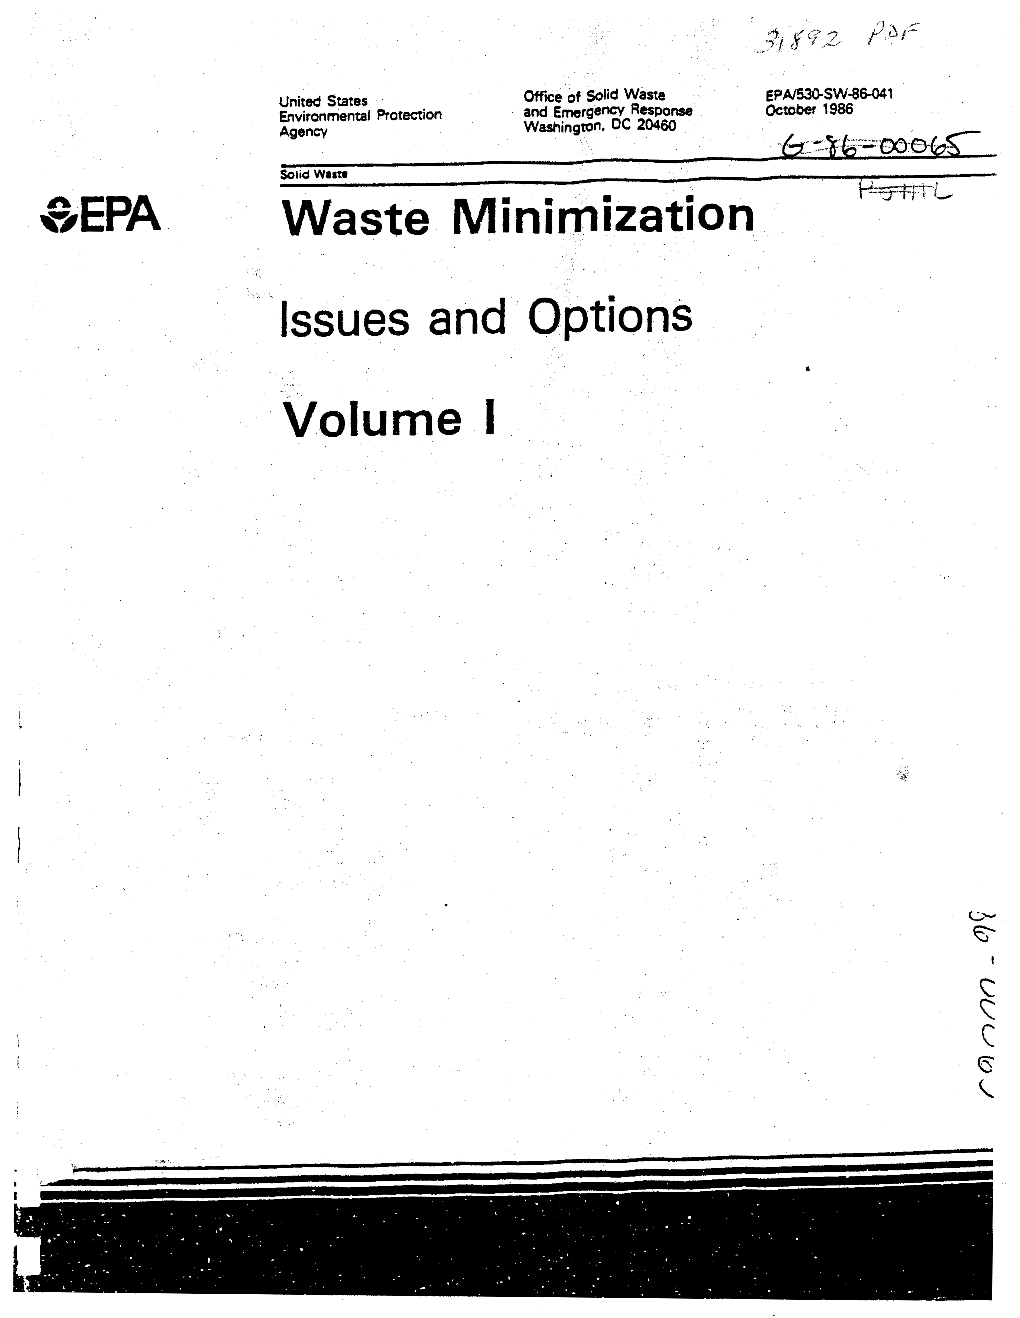 Waste Minimization Issues and Options Volume I